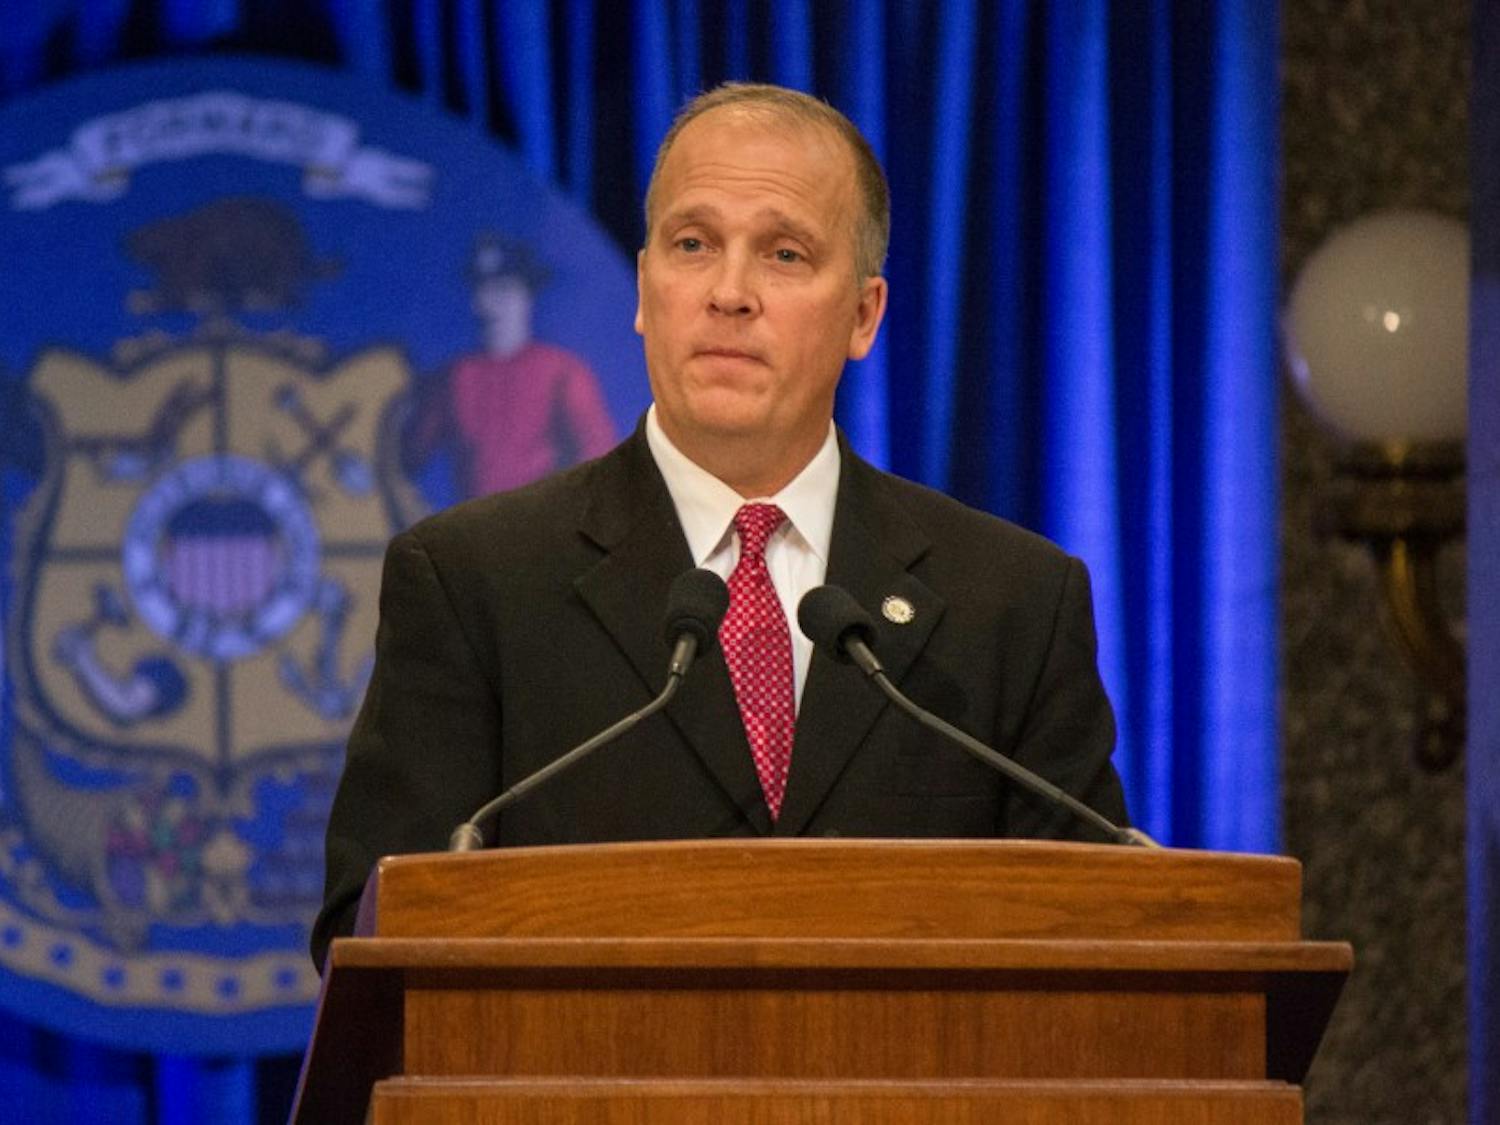 Attorney General Brad Schimel, who says processing all untested rape kits is among his top priorities, launched a website Wednesday that allows the public to get more information.